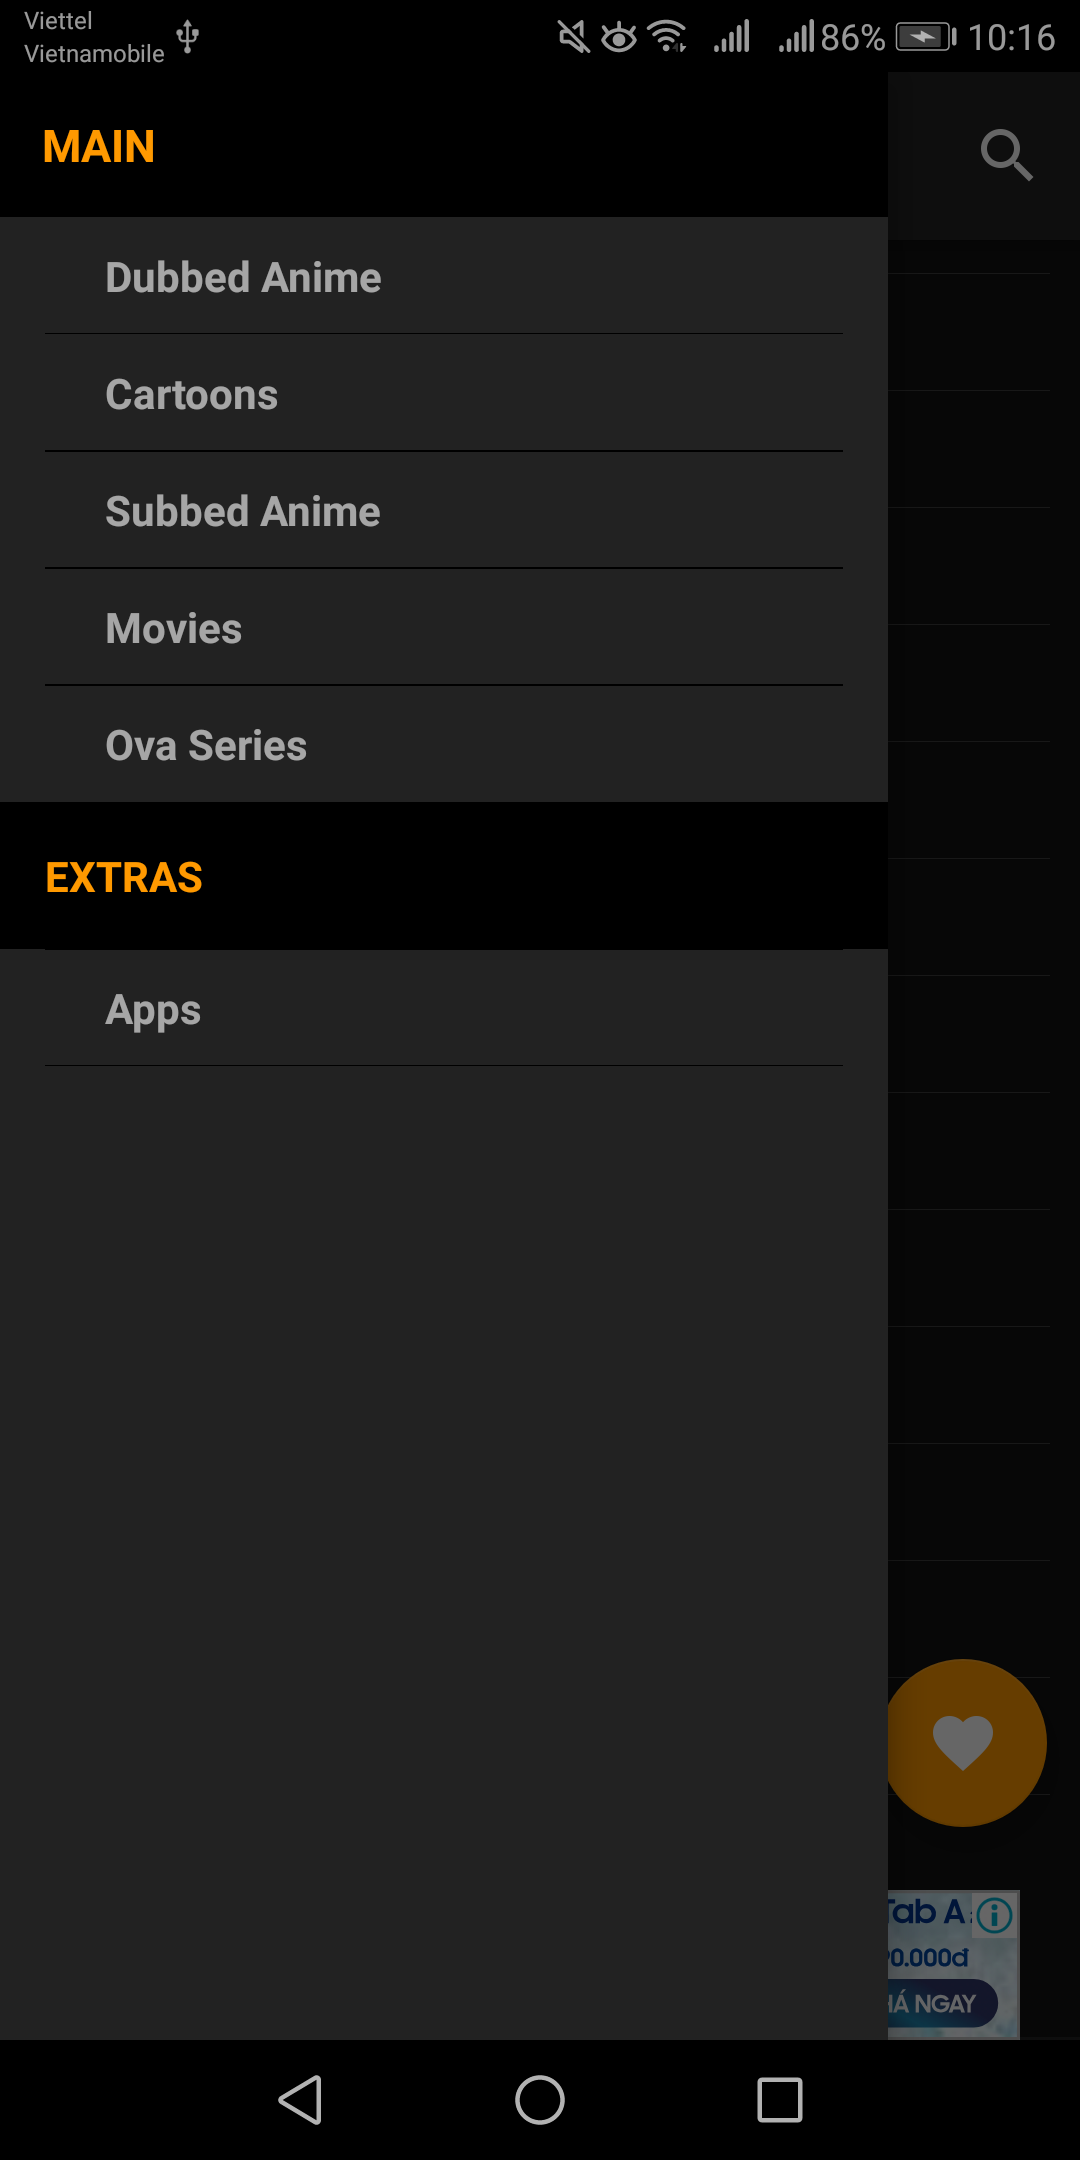 Anime tv - Anime Tv Online HD APK 10.8.16 for Android – Download